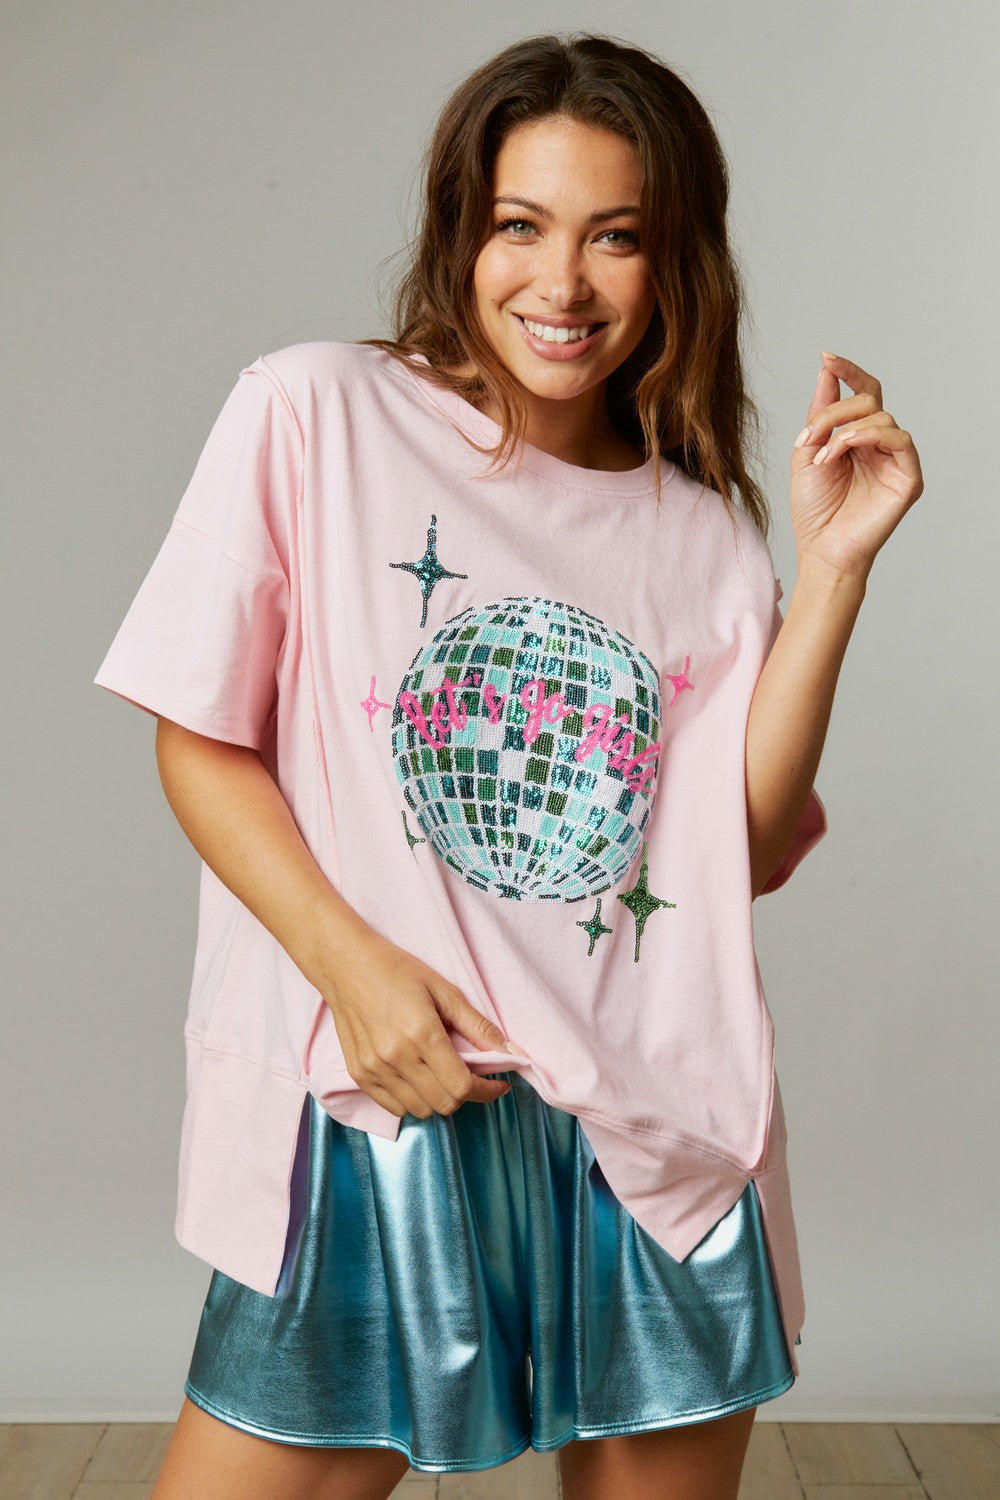 Fantastic Fawn Disco Fever Top - Baby Pink, short sleeves, disco sequin patch, oversized, Lets Go Girls